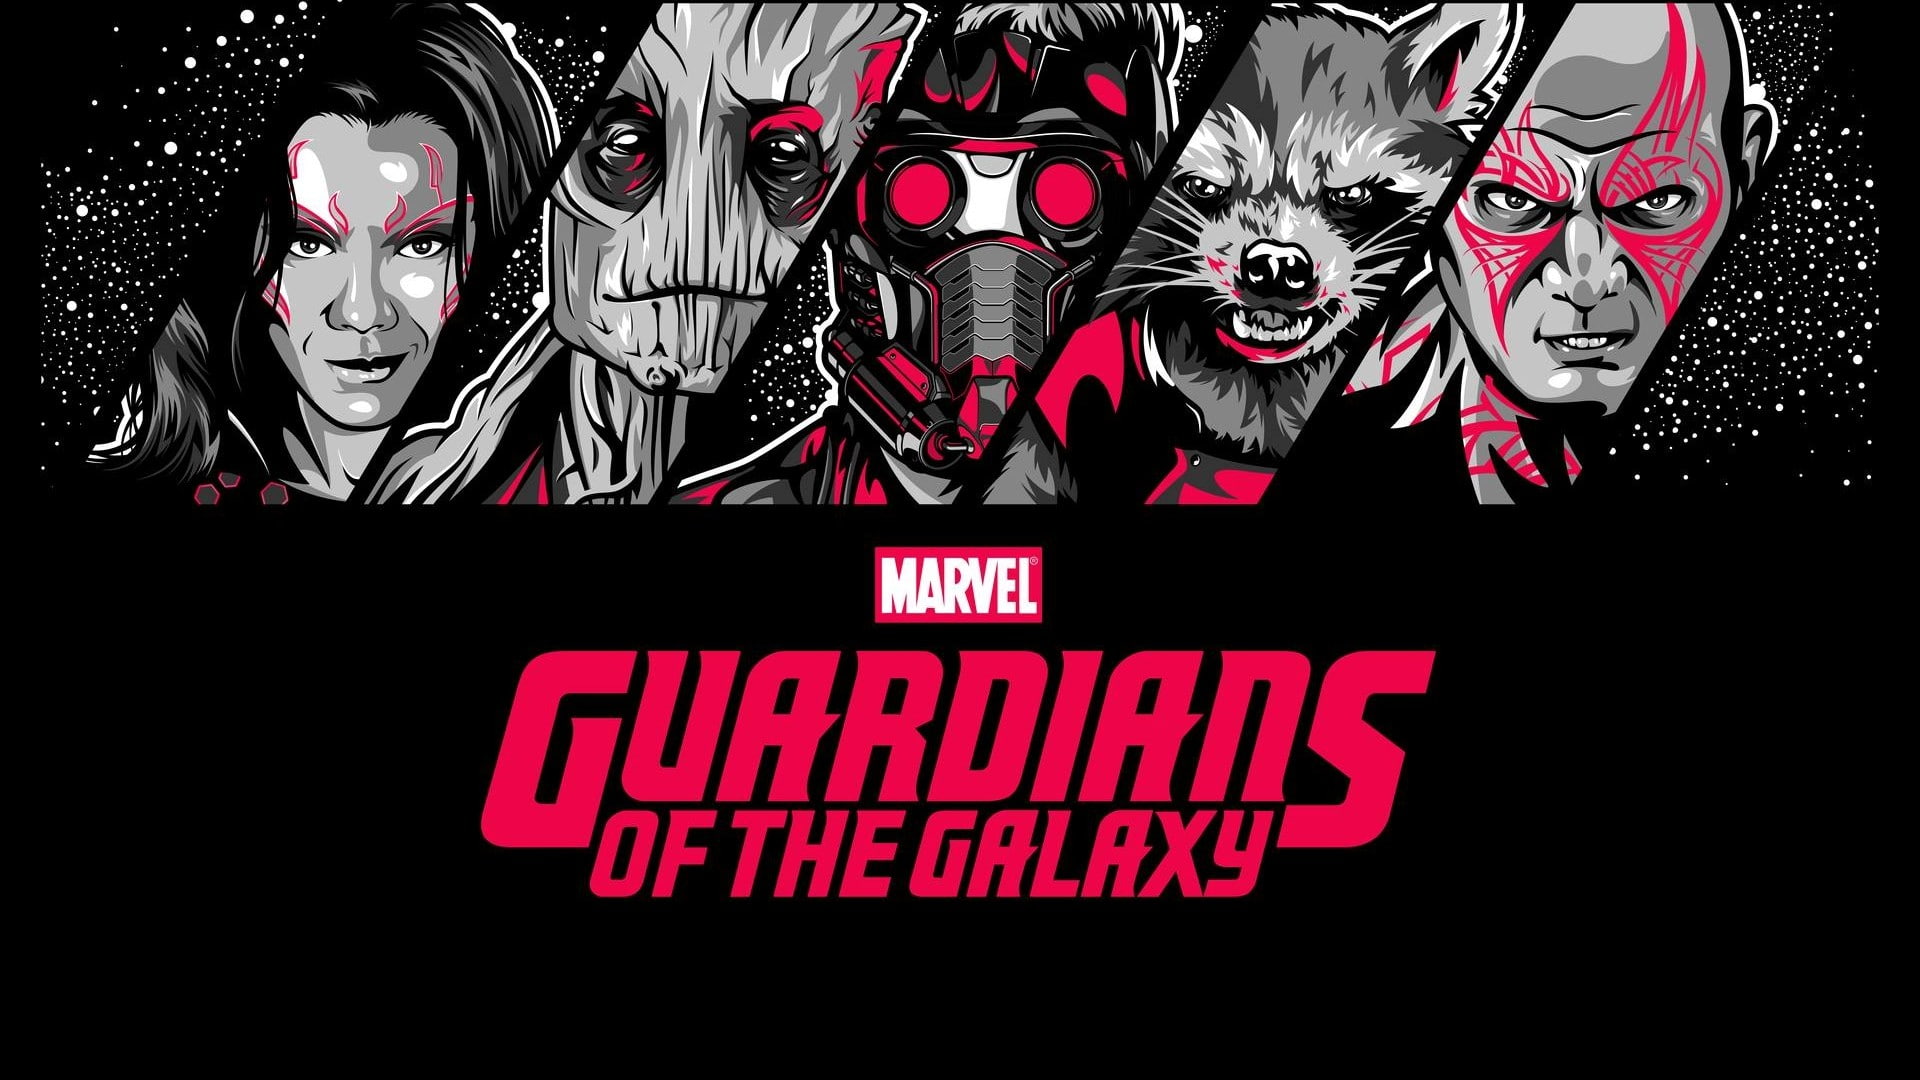 Guardians of the Galaxy, Rocket Raccoon, Drax the Destroyer